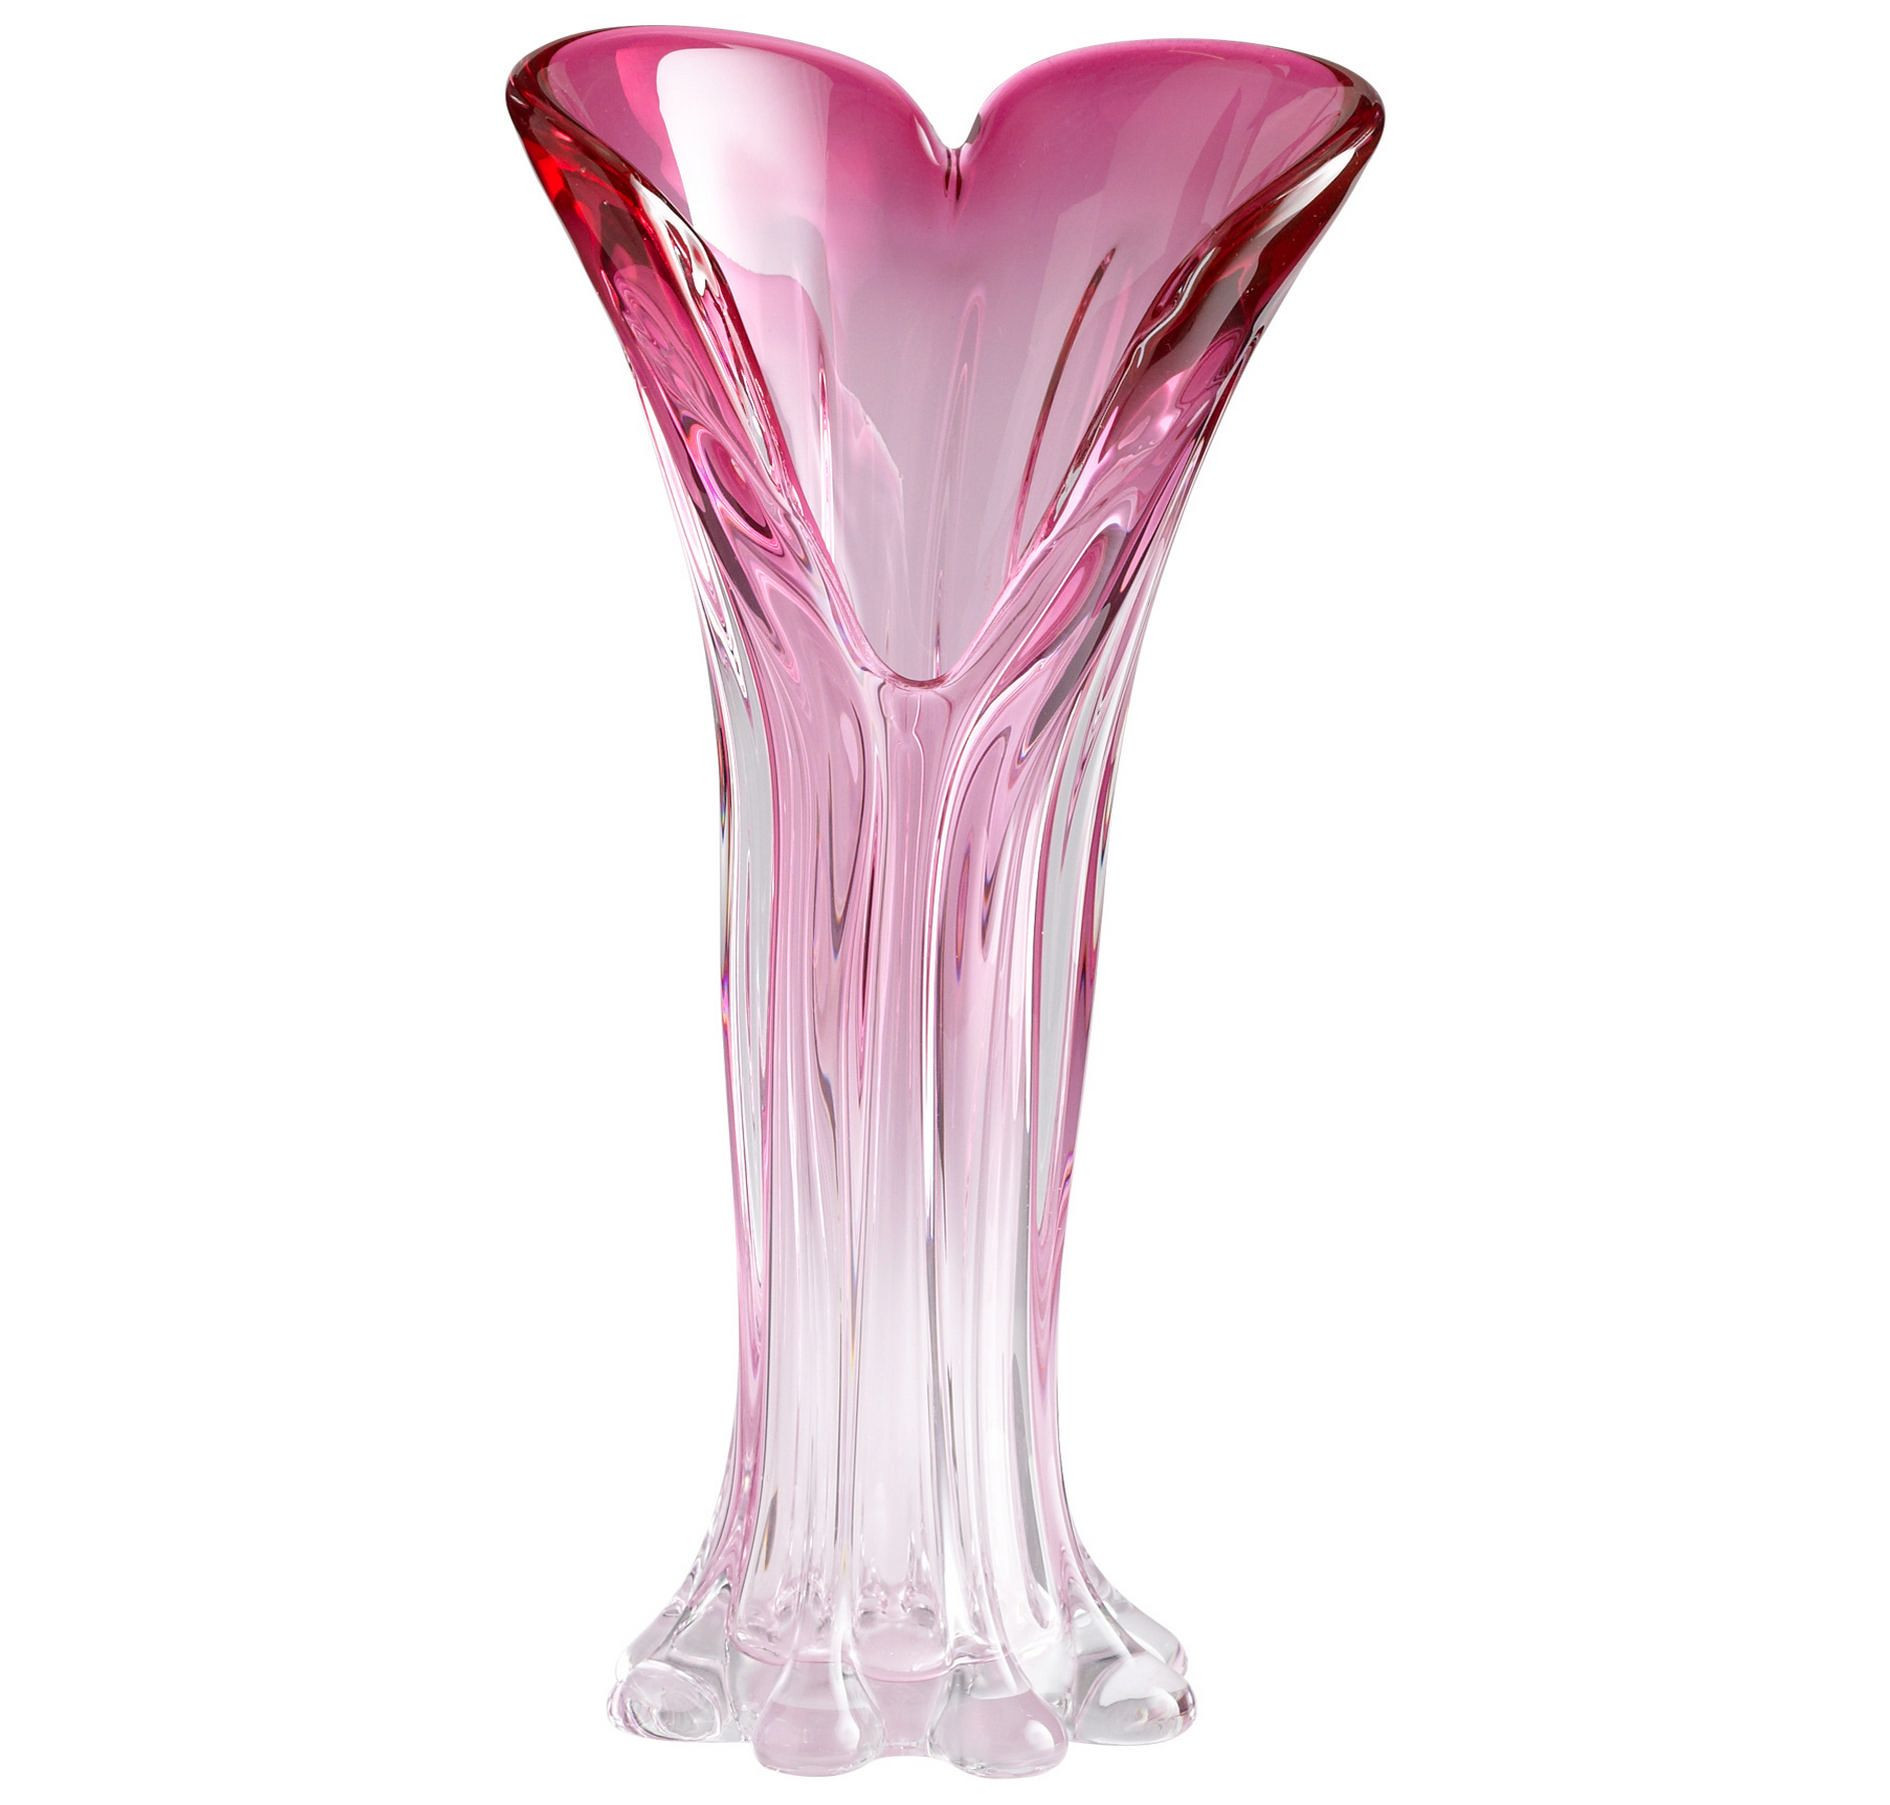 hot pink vase of cyan design 05388 large cuore vase in pink finish in home decor with cyan design 05388 large cuore vase in pink finish in home decor vases urns